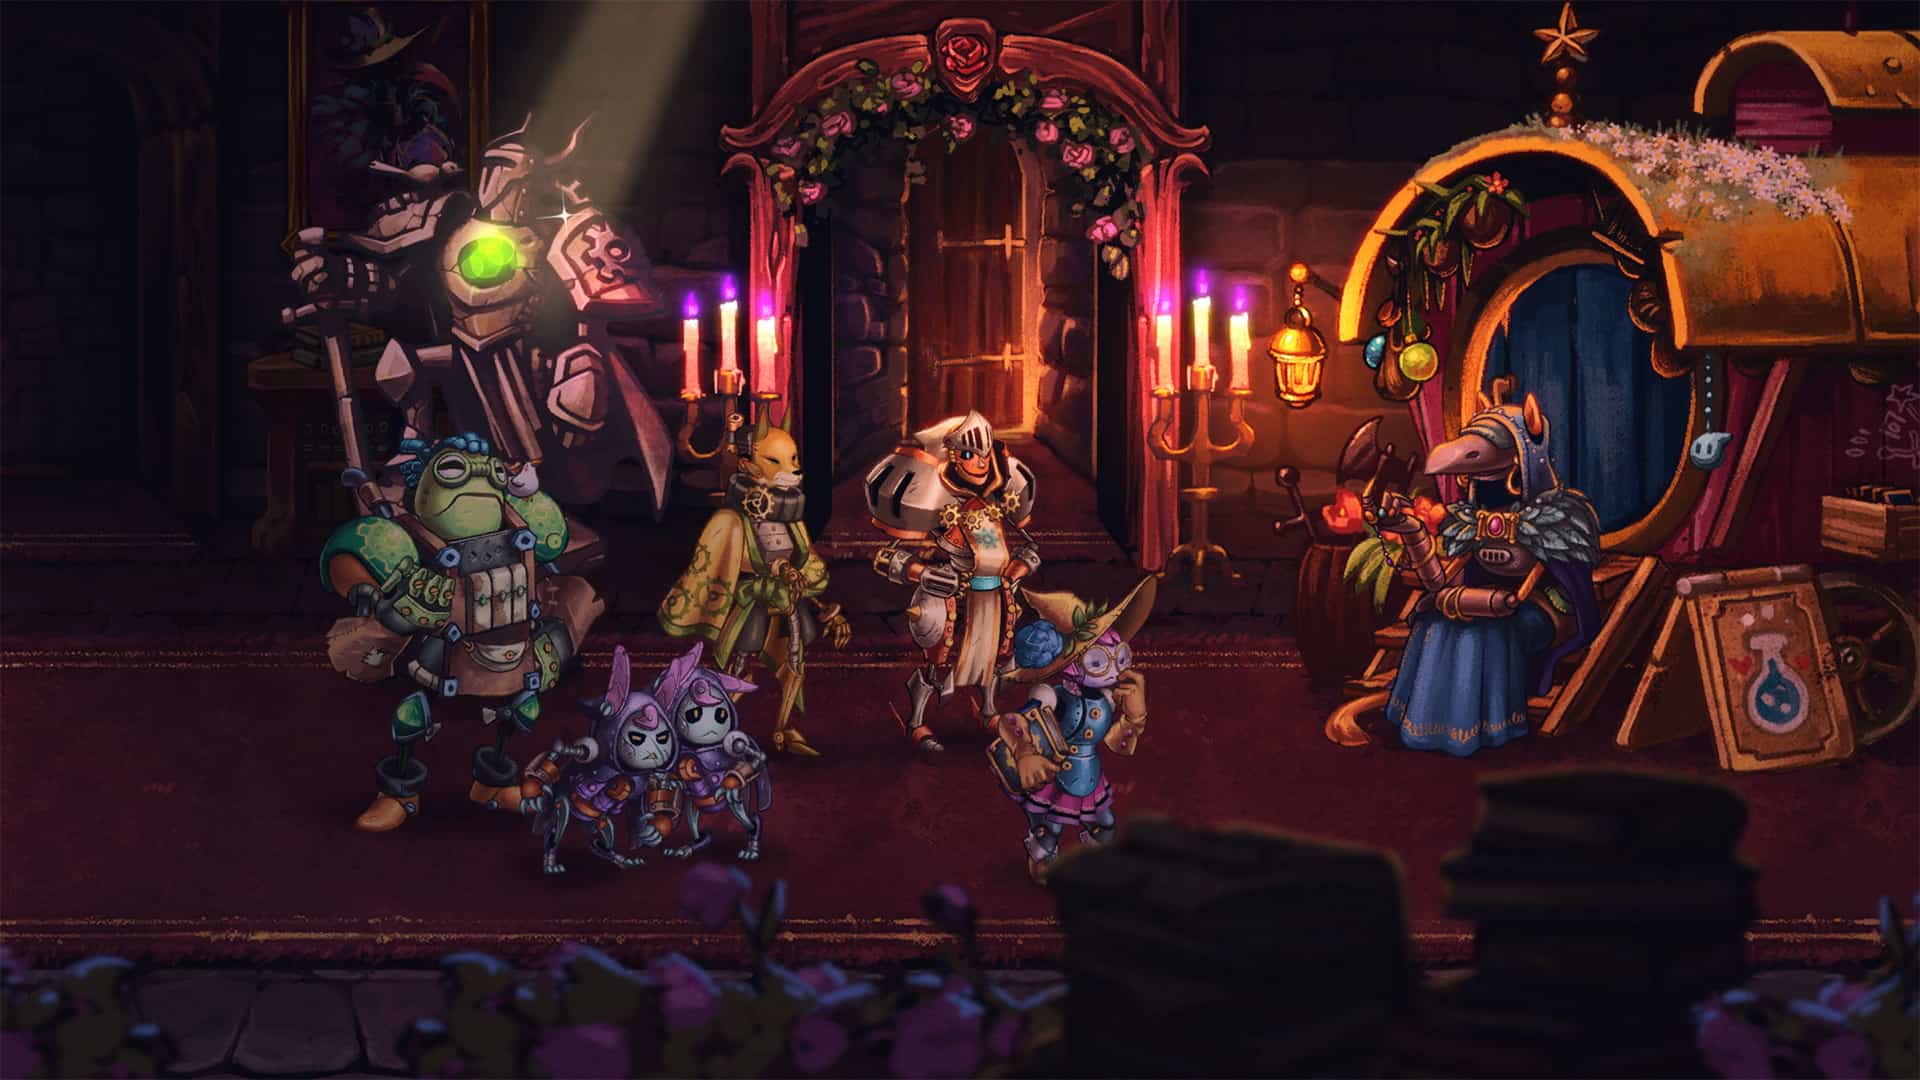 A Steam promotional image for Steamworld Quest: Hand of Gilgamech.